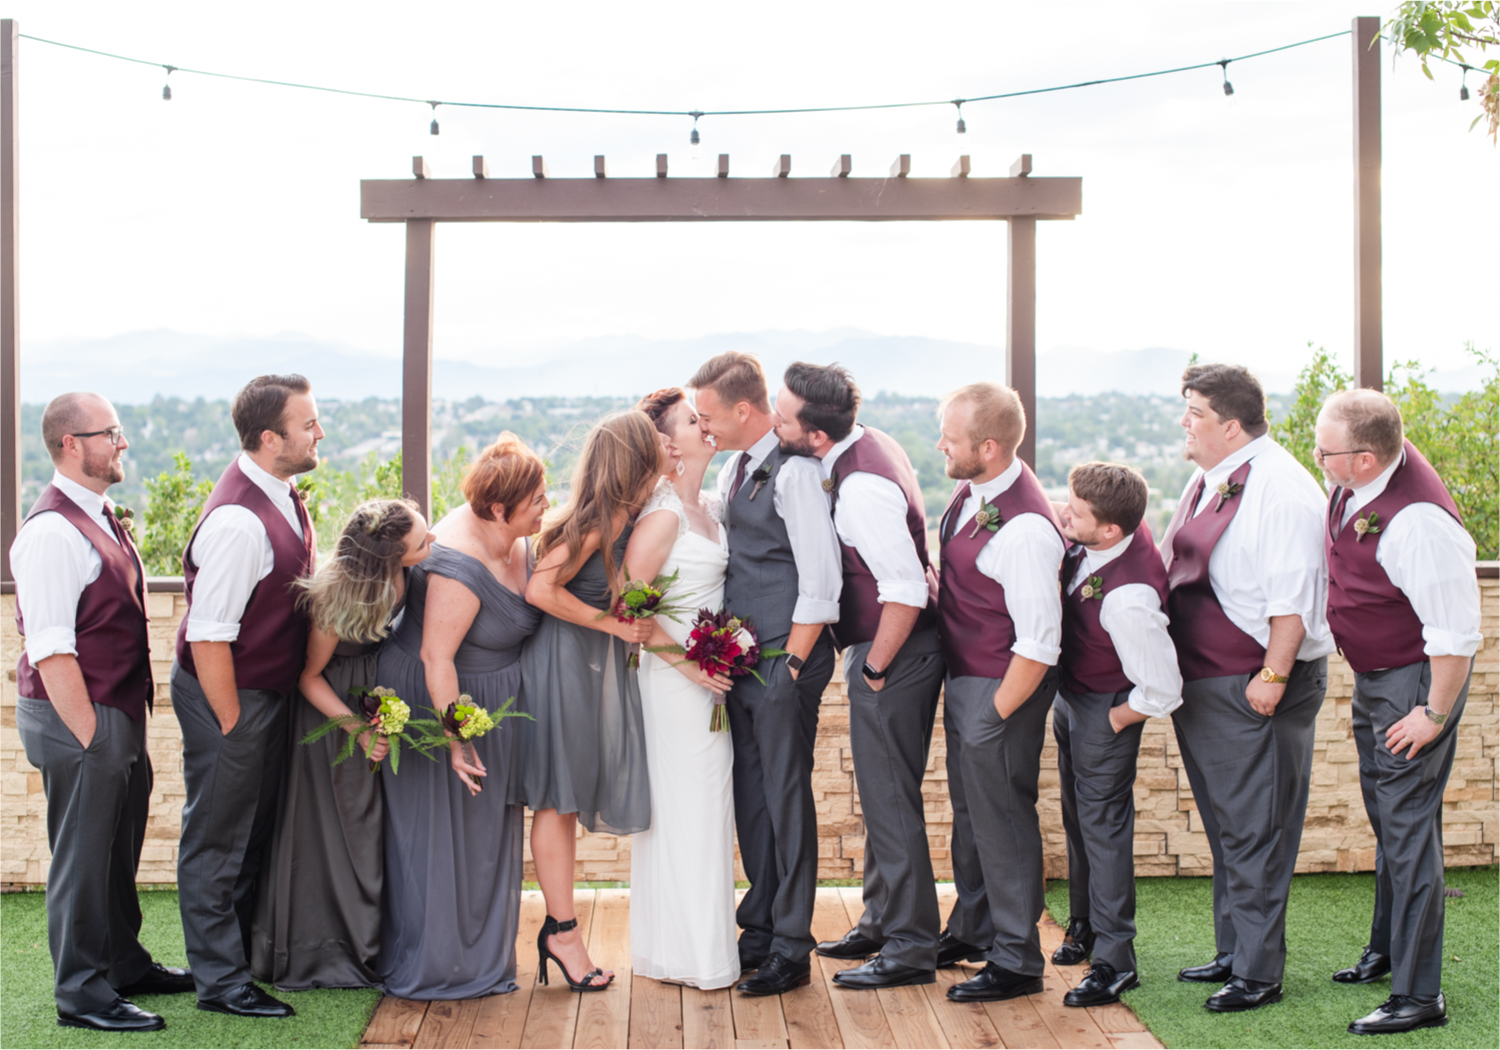 Modern Romantic wedding at Wedgwood Weddings Brittany Hill in Denver Colorado | Britni Girard Photography | Whiskey unity ceremony and live band The Burroughs are highlights of this musician couples wedding | Dragonfly Floral Company
